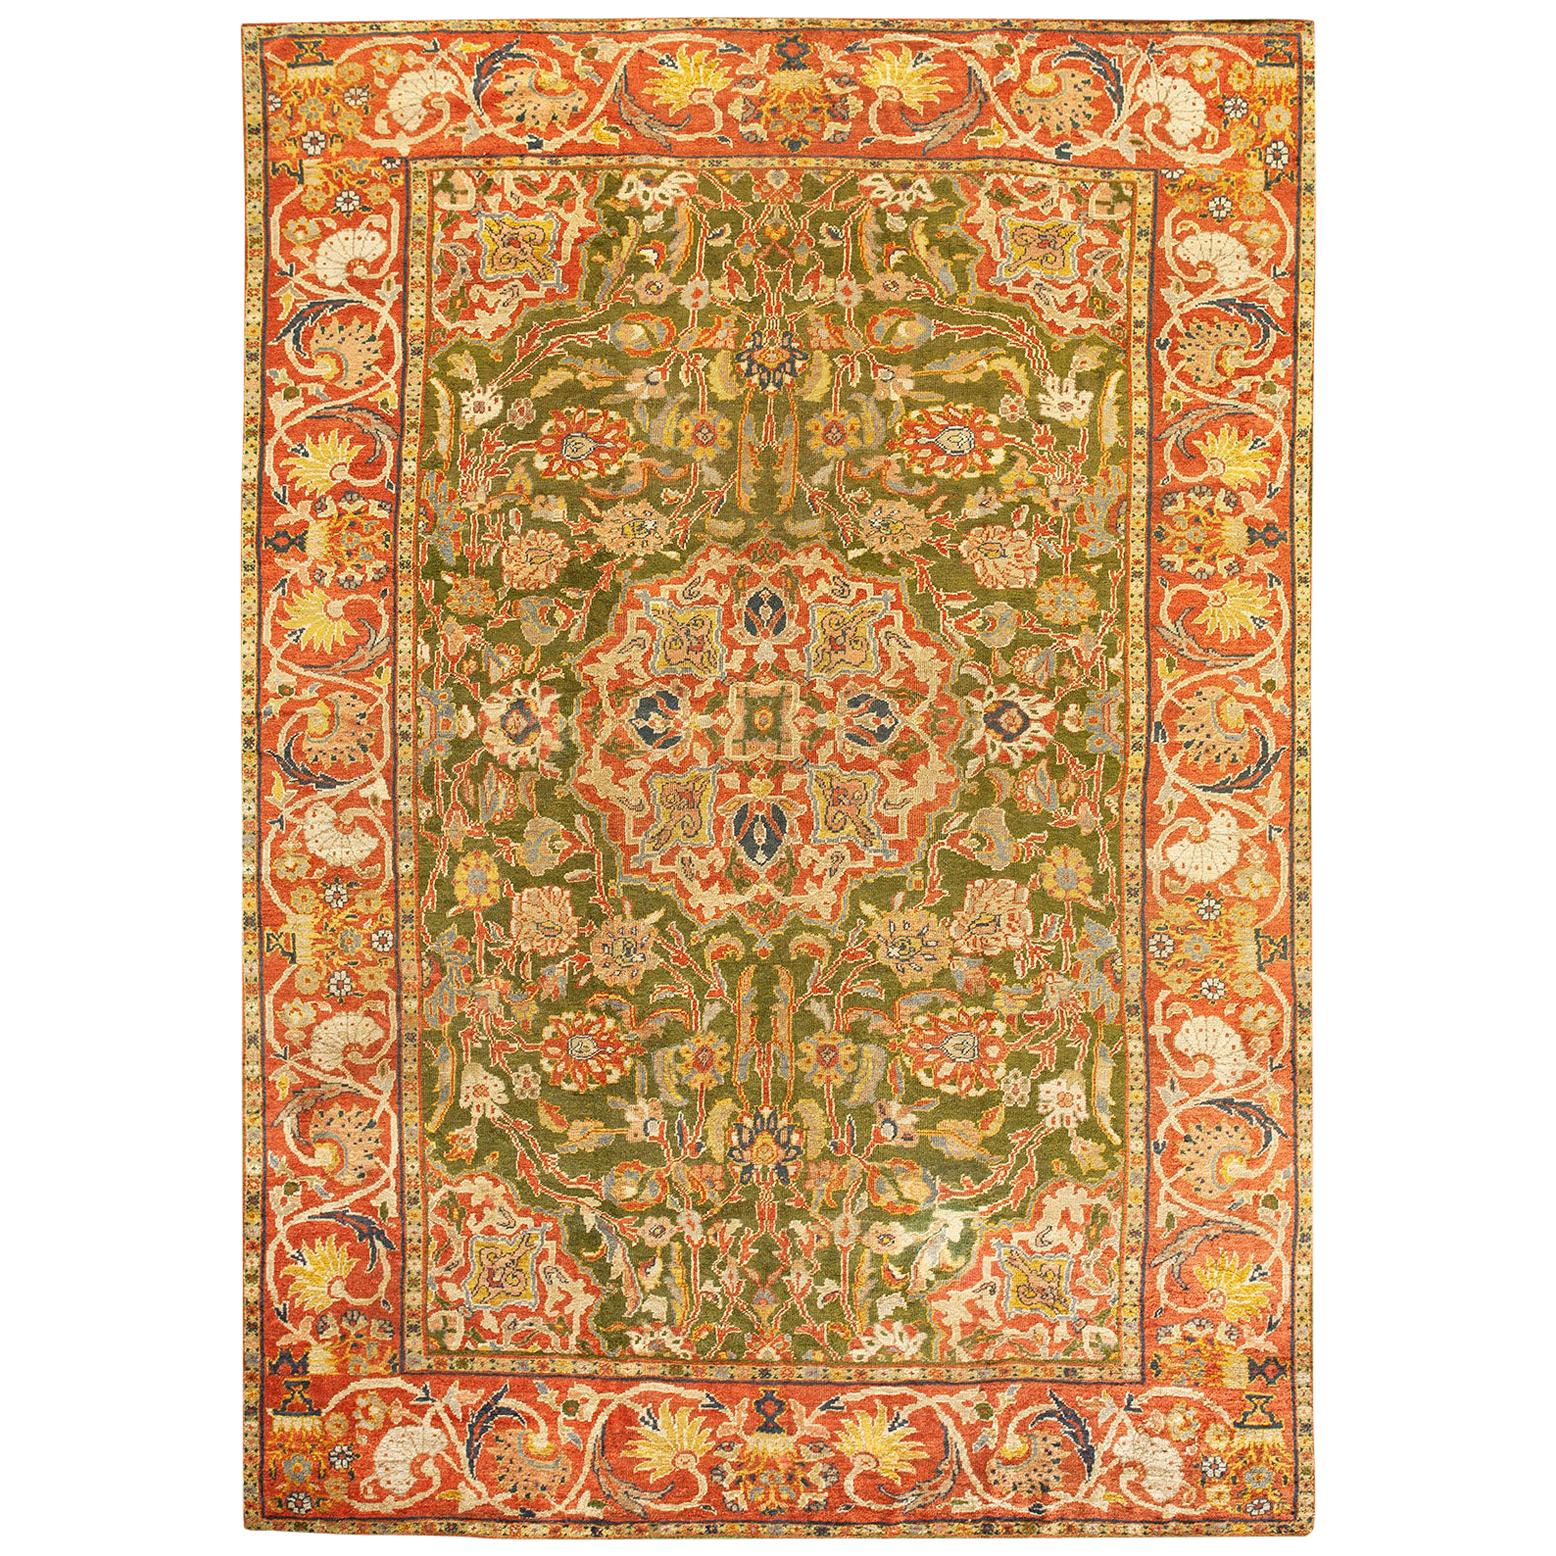 Late 19th Century Persian Sultanabad Carpet  ( 9'4" x 12'4" - 285 x 375 ) For Sale